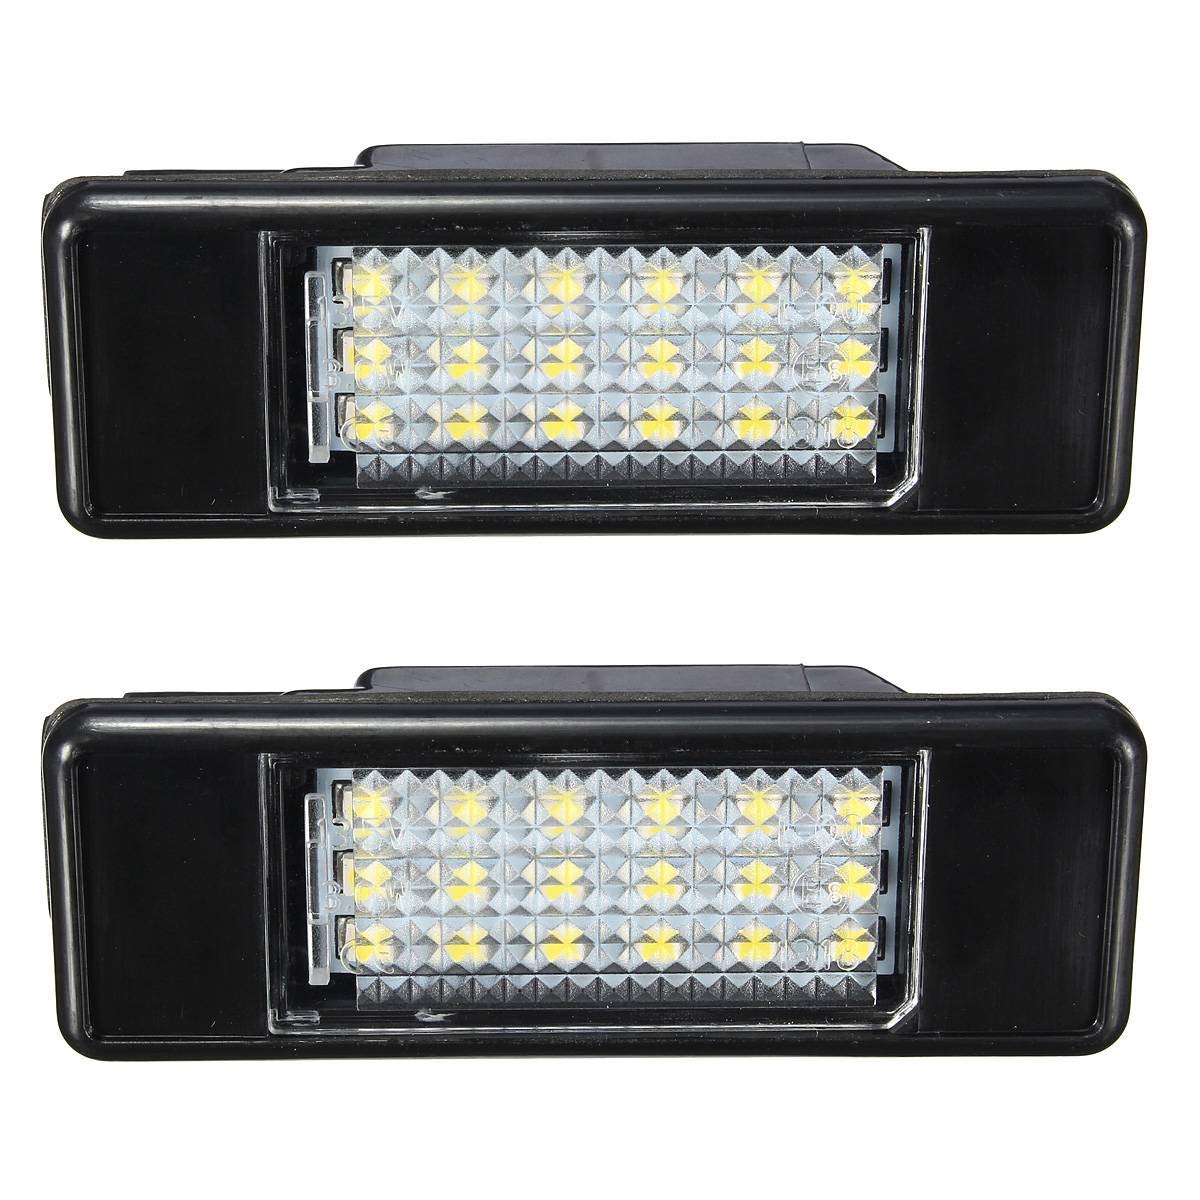 HUYGB Kennzeichenbeleuchtung 2x Car Rear 18 LED SMD License Number Plate Light Lamp 6000K Fit Use For Peugeot 106 207 307 308 406 407 Fit Use For CITROEN C3 C4 C5 C6 C8 Nummernschildbeleuchtung von HUYGB